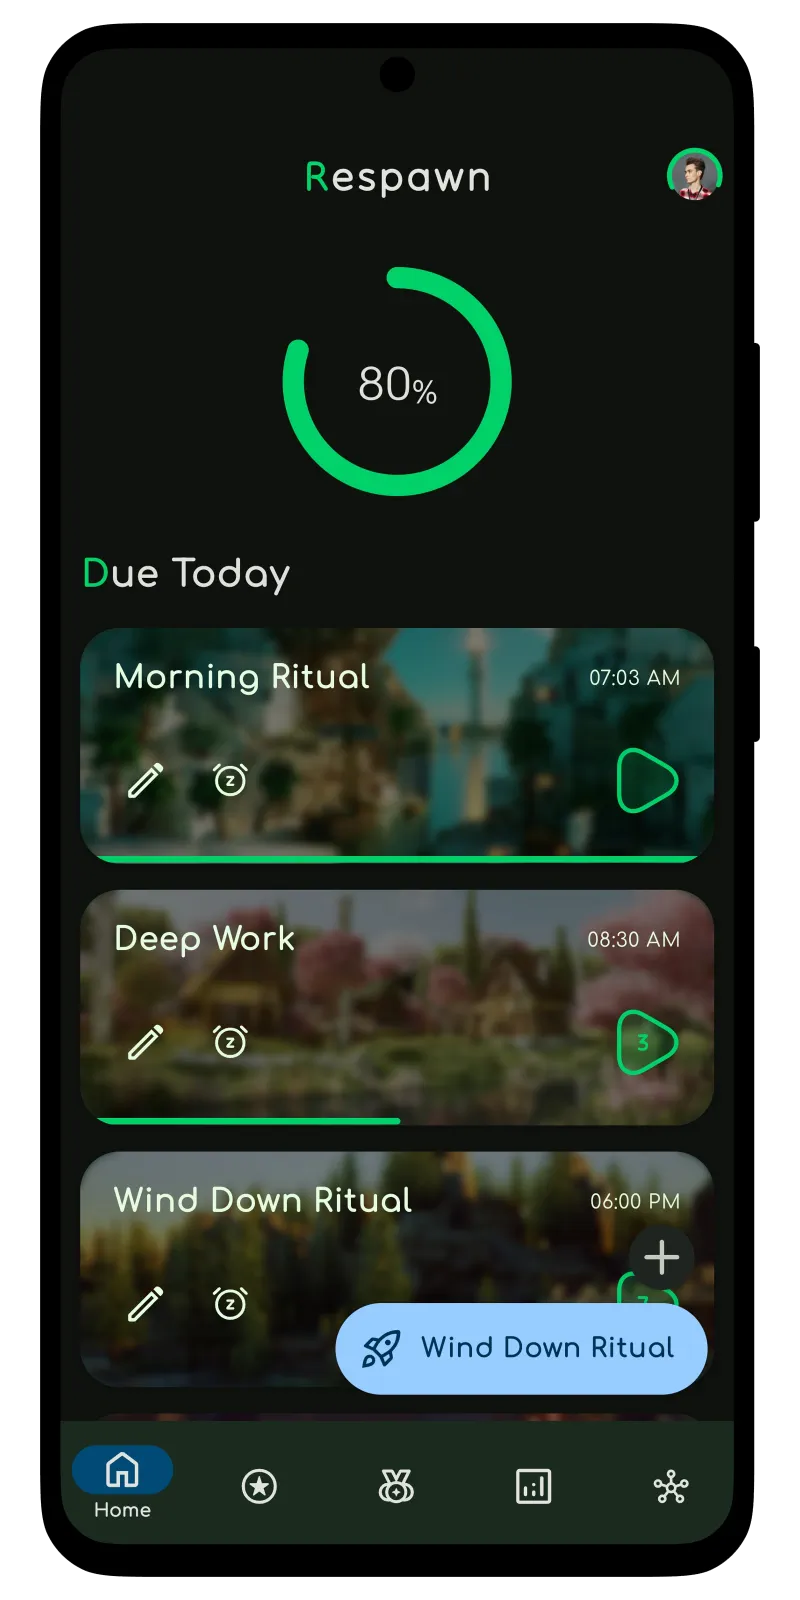 A mobile app showing a list of healthy routines